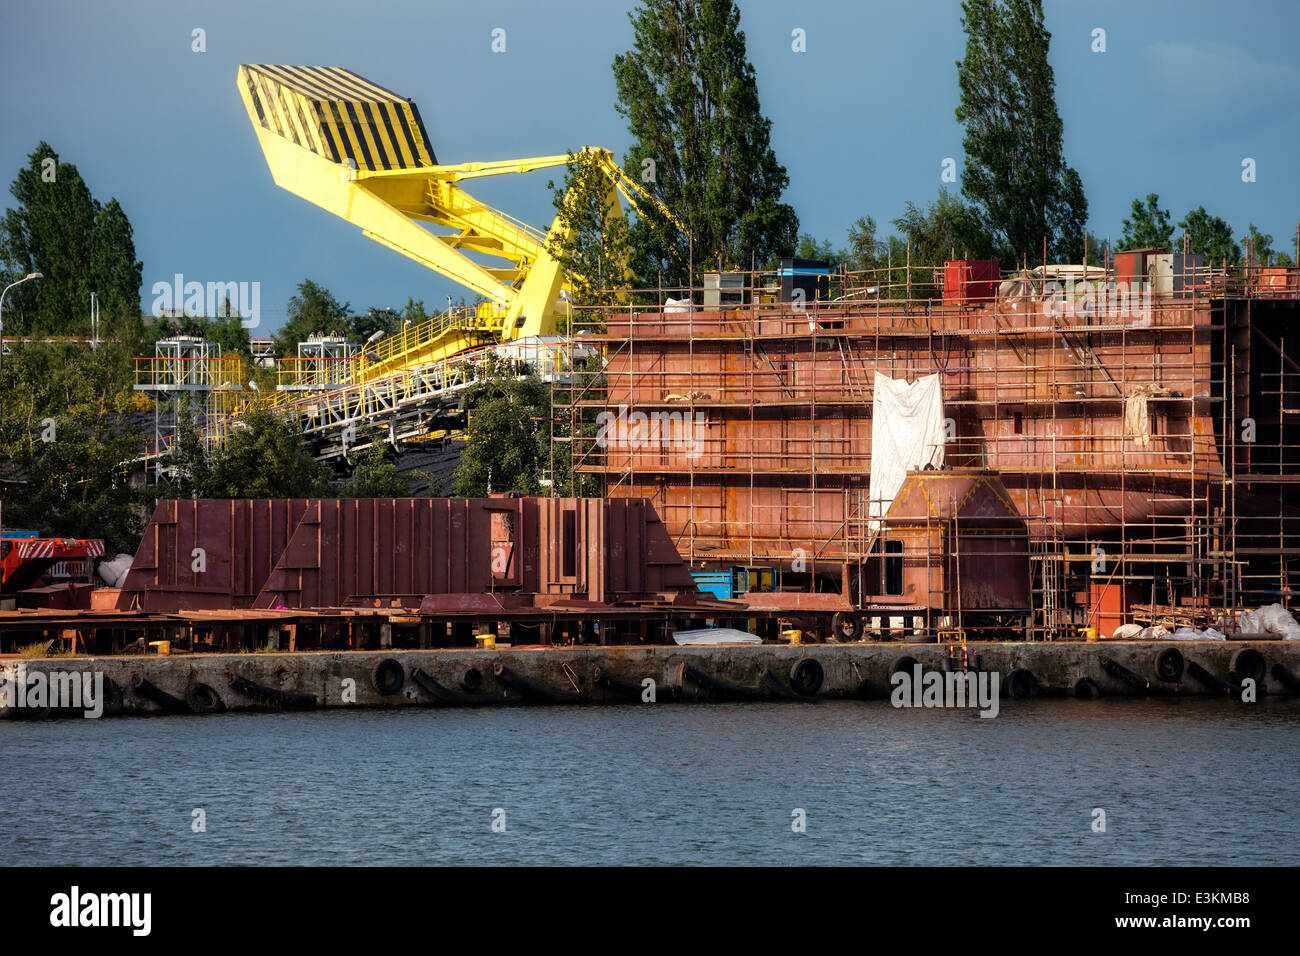 Part of large ship under construction. Stock Photo